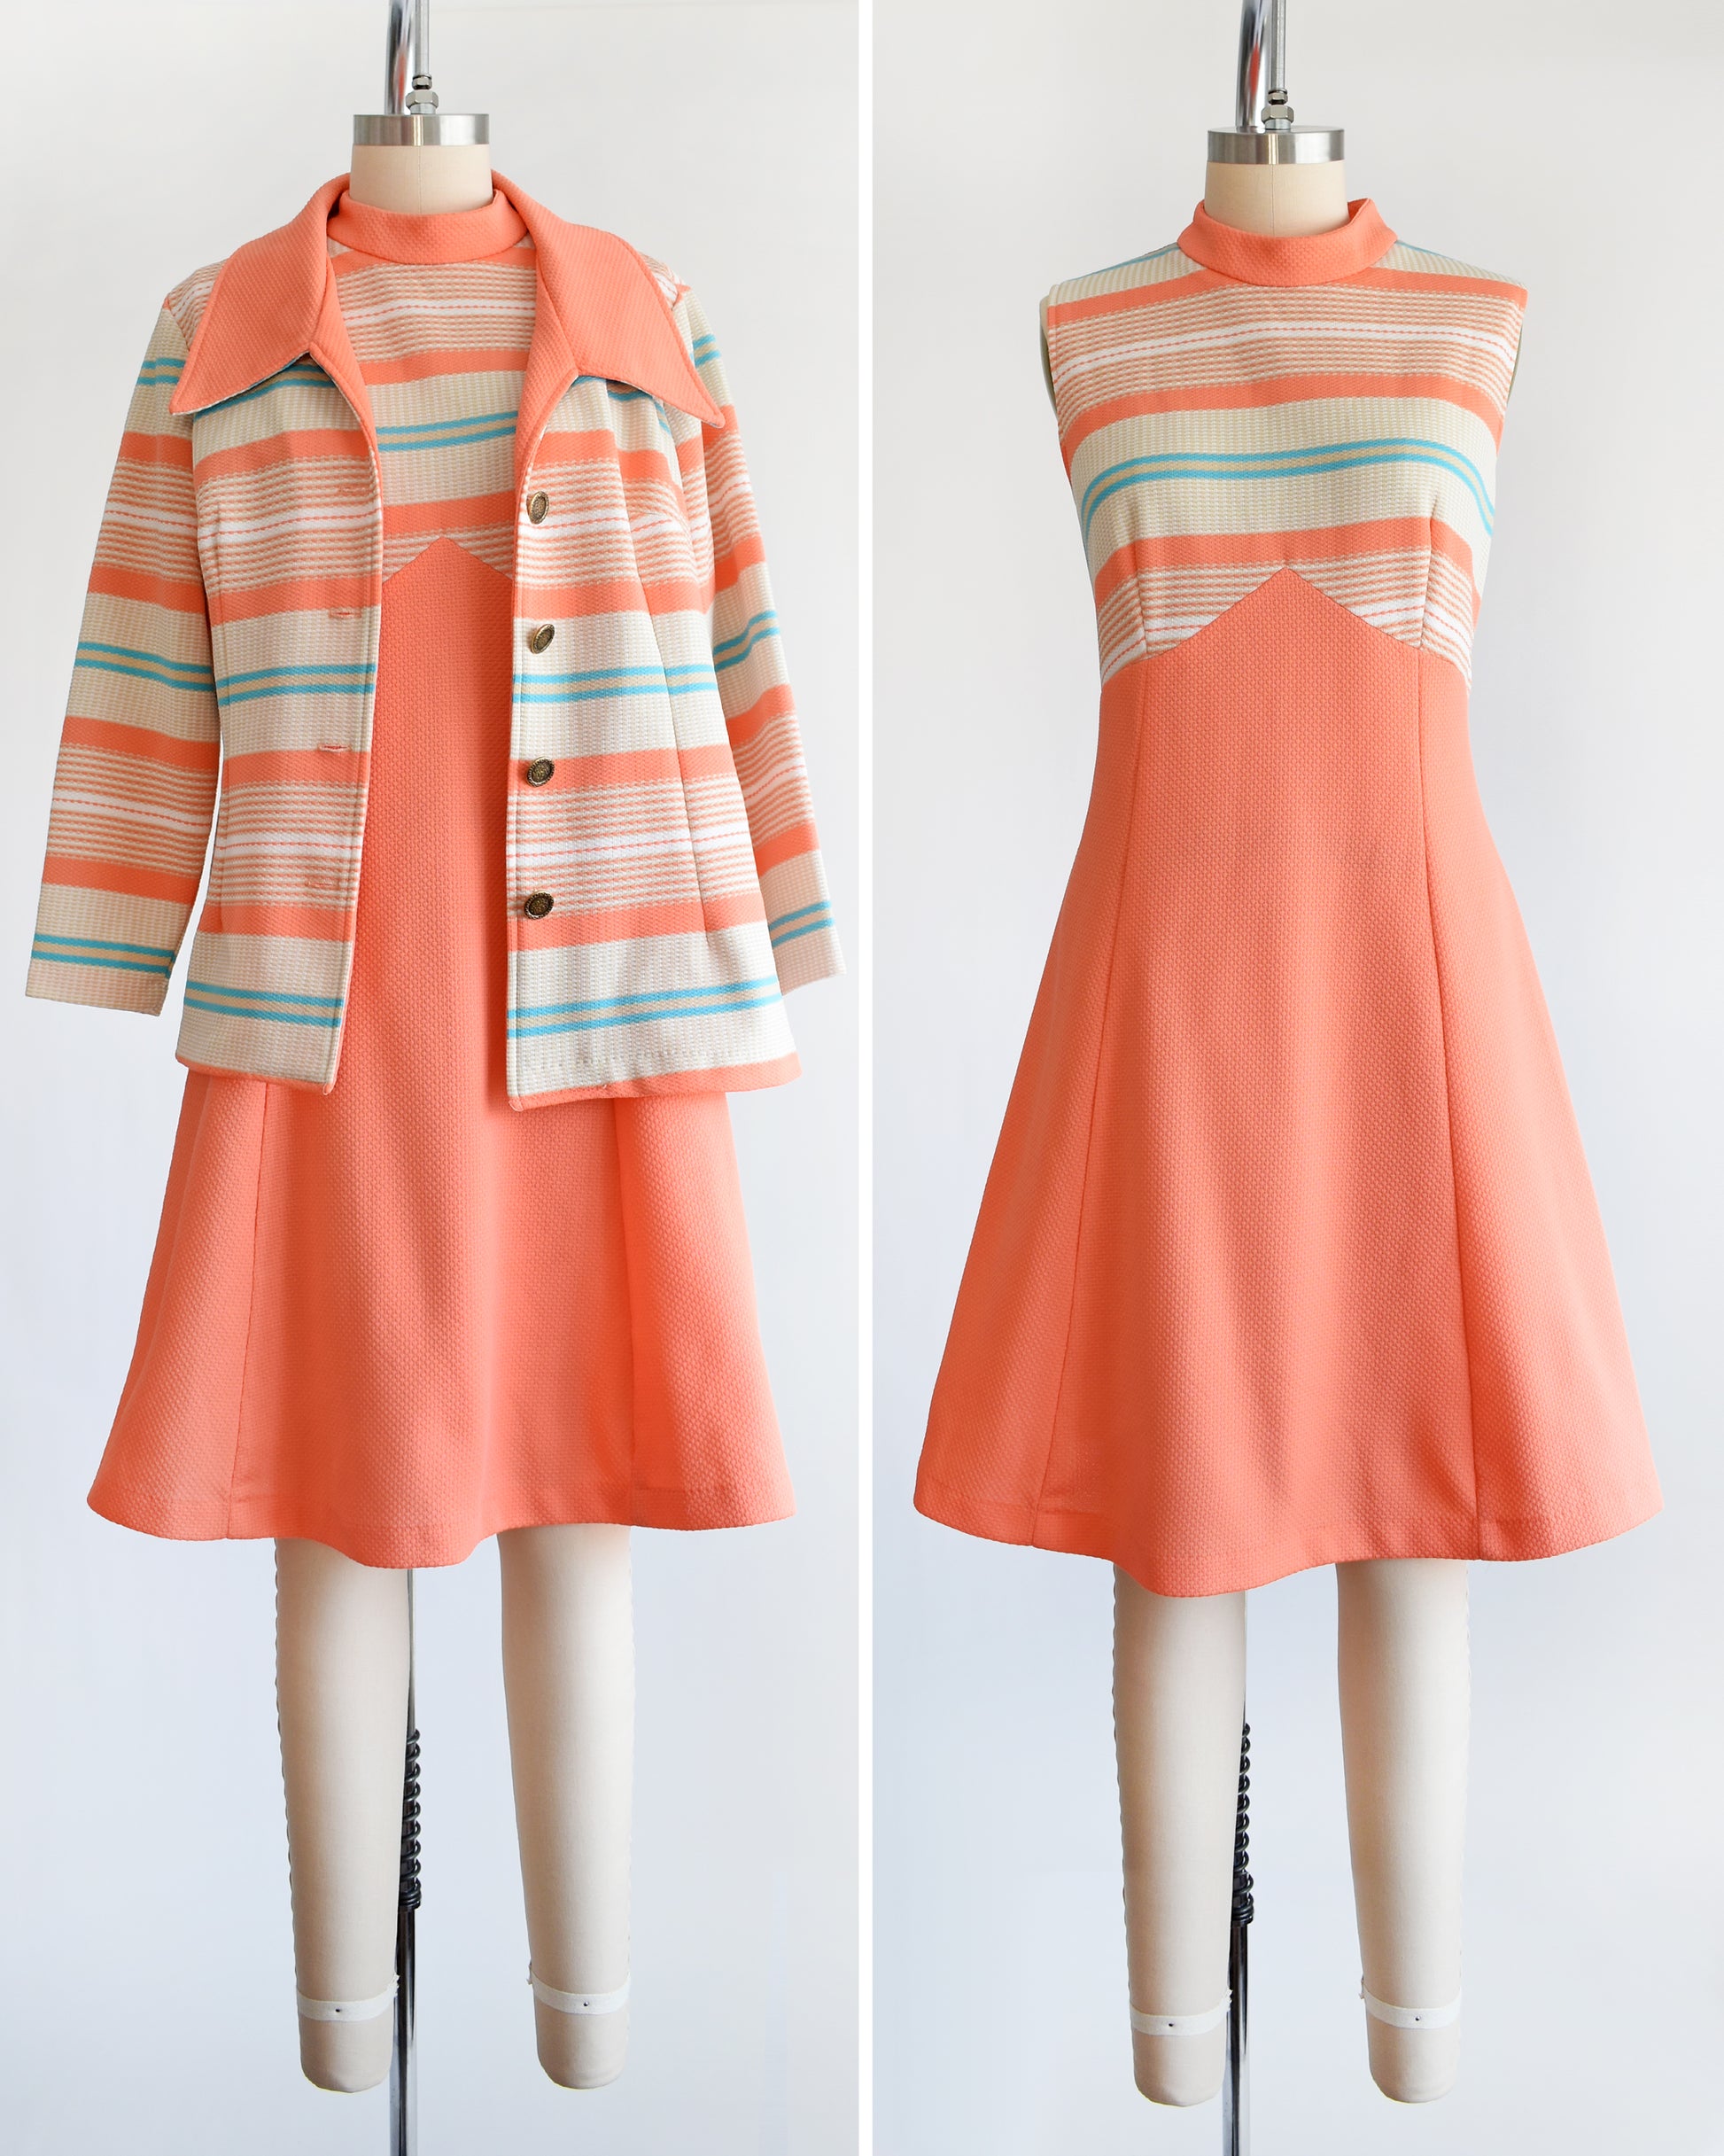 A vintage 1970s peach and blue mod dress set. This set comes with a peach, tan, blue, and white horizontal striped jacket and matching dress.